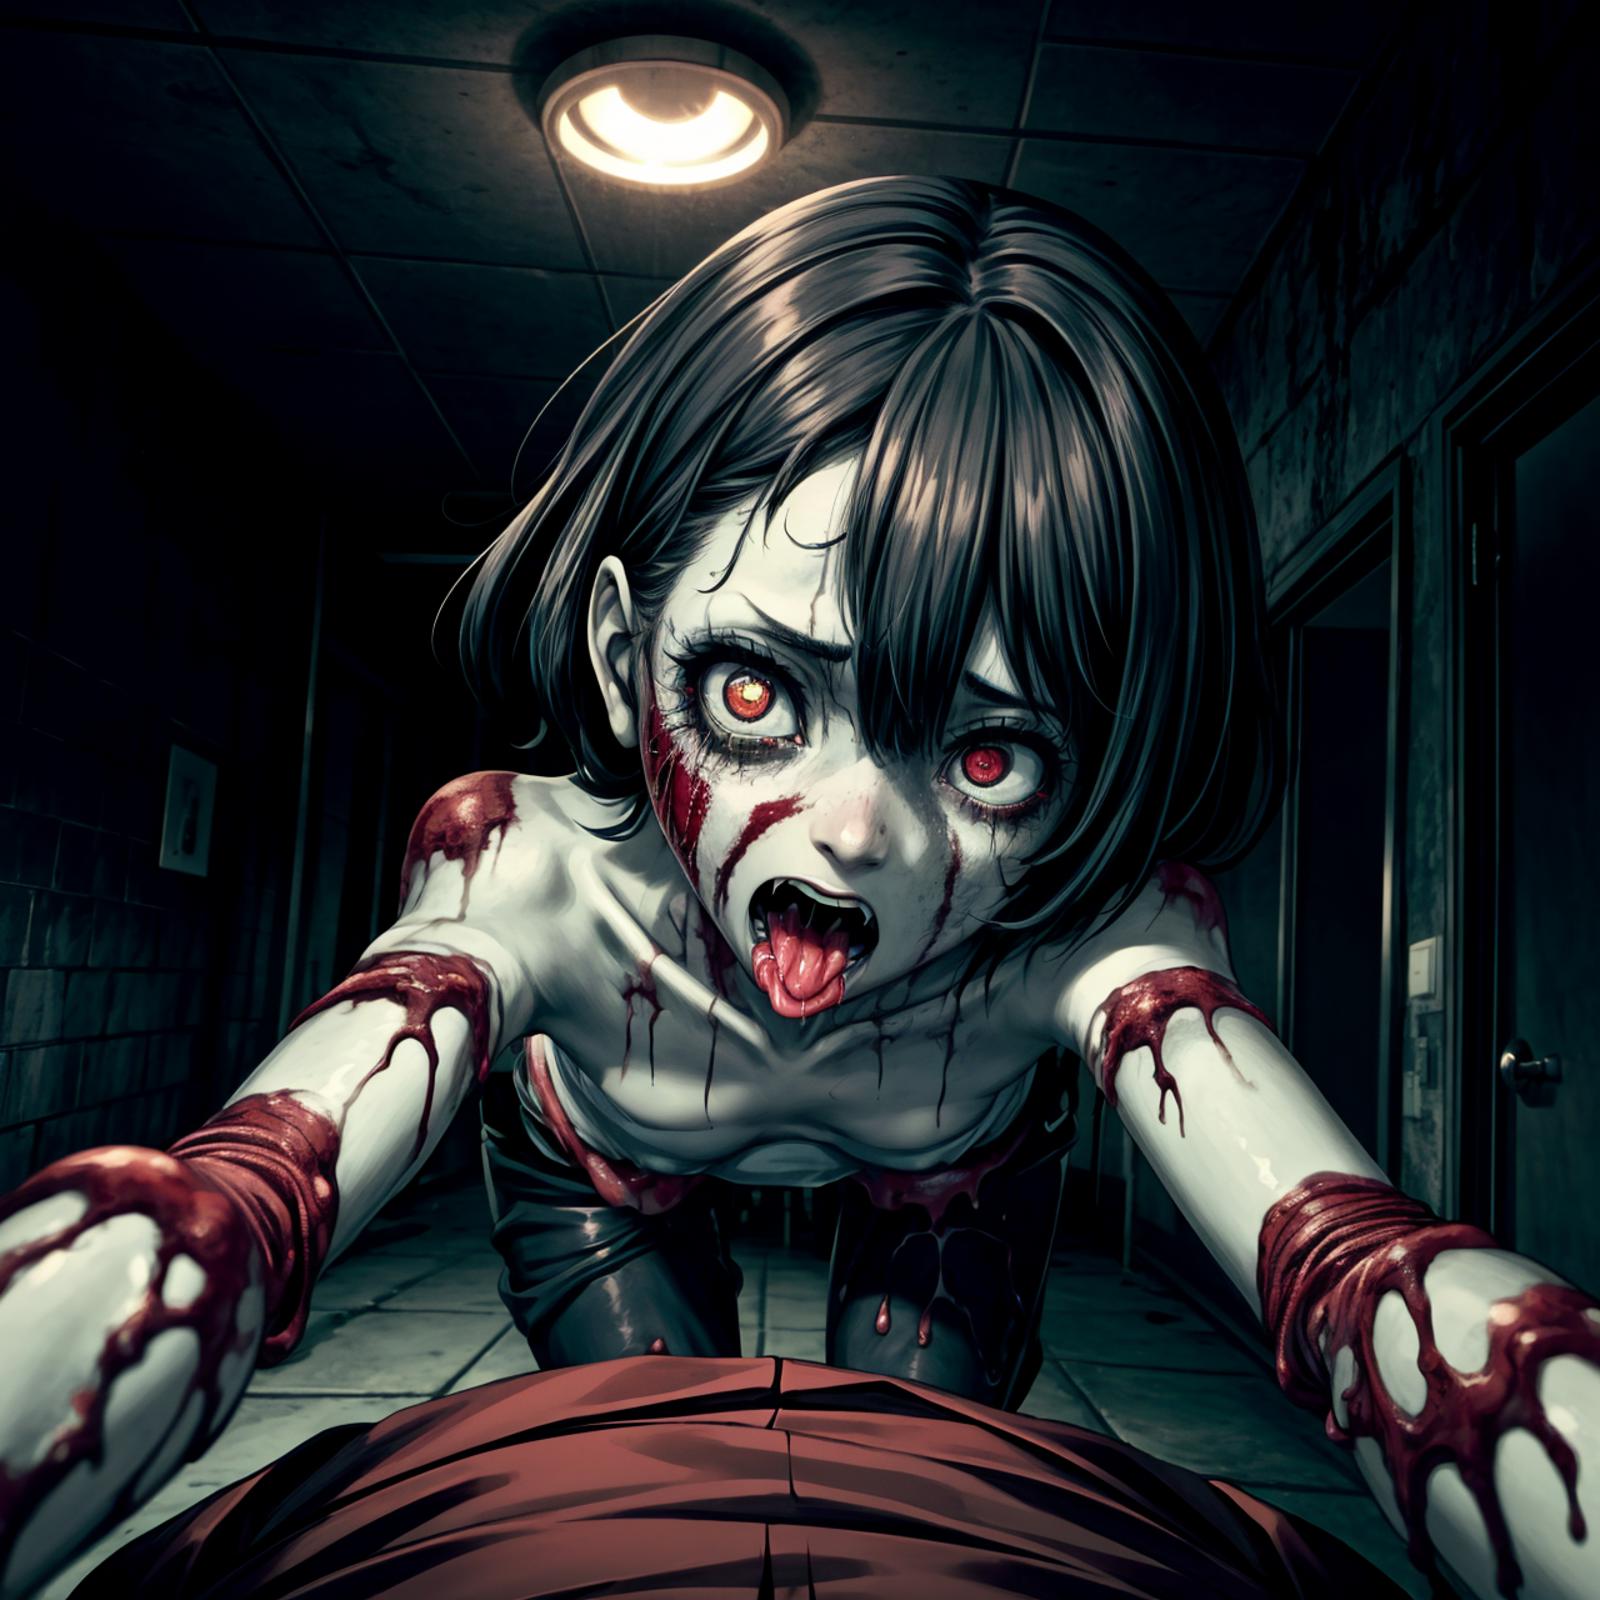 A creepy animated image of a girl with blood dripping from her hands and mouth, standing above a person with blood on their body.